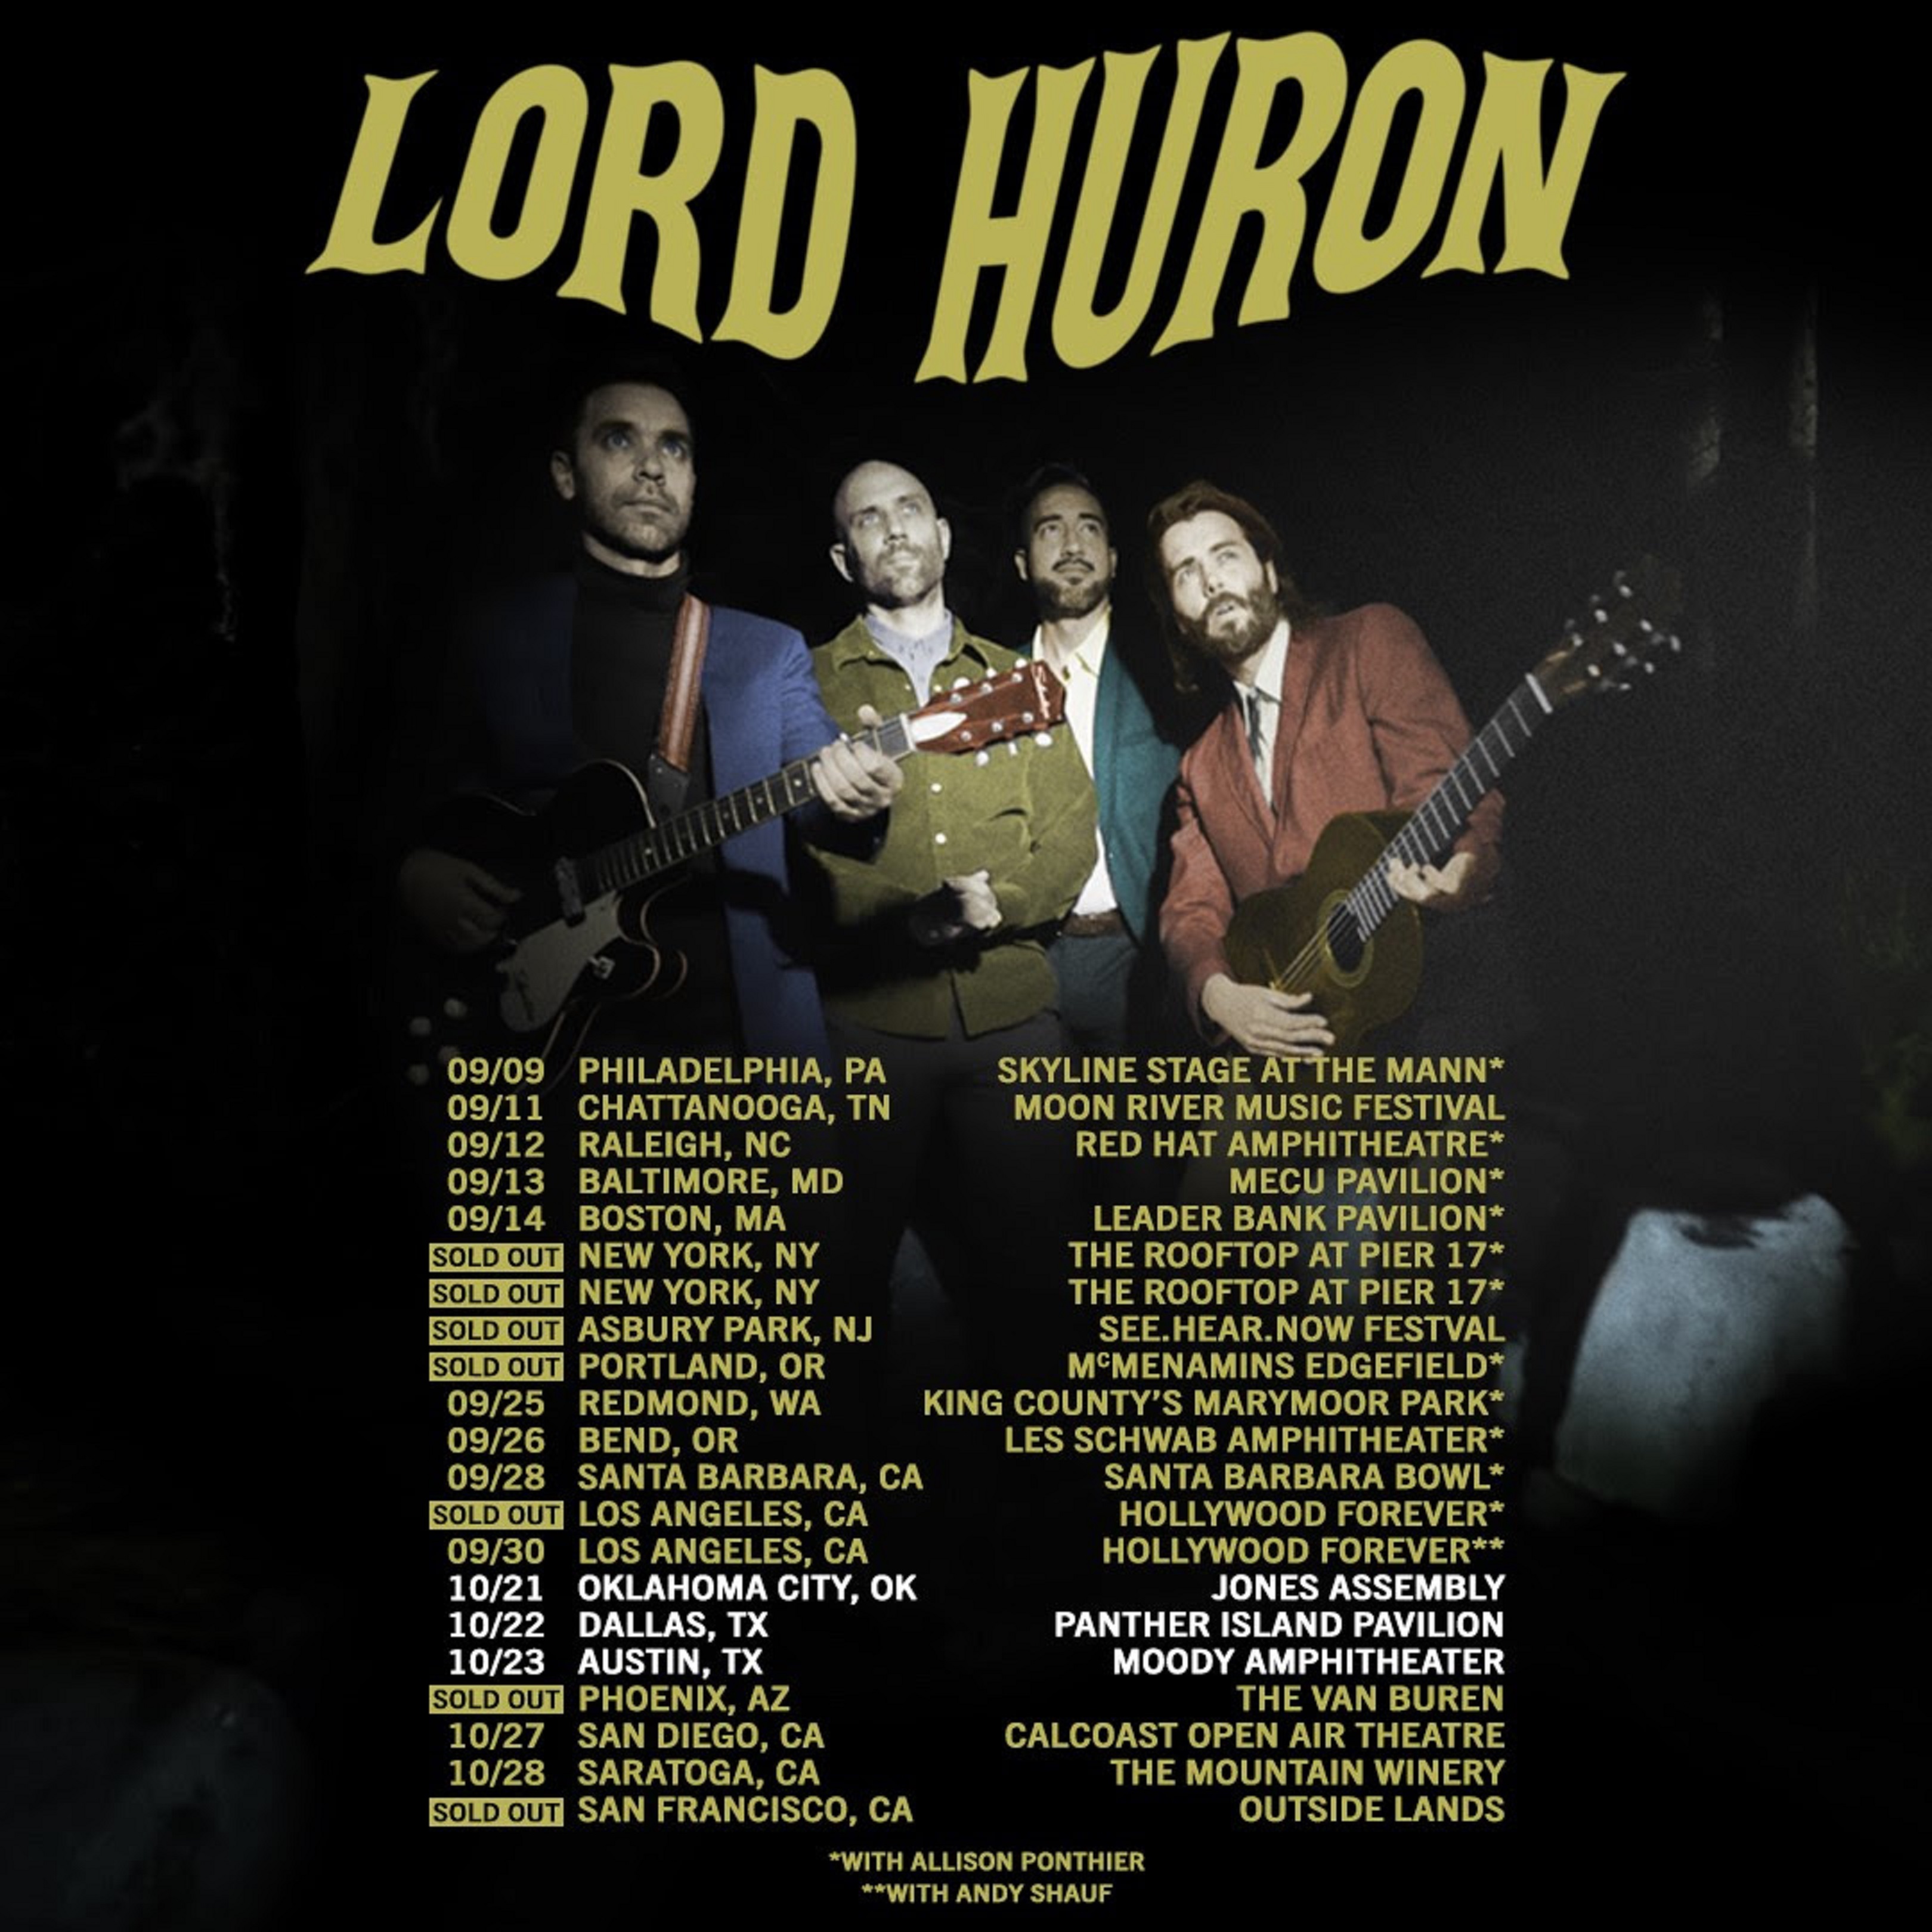 LORD HURON ADDS NEW DATES TO FALL 2021 HEADLINE TOUR